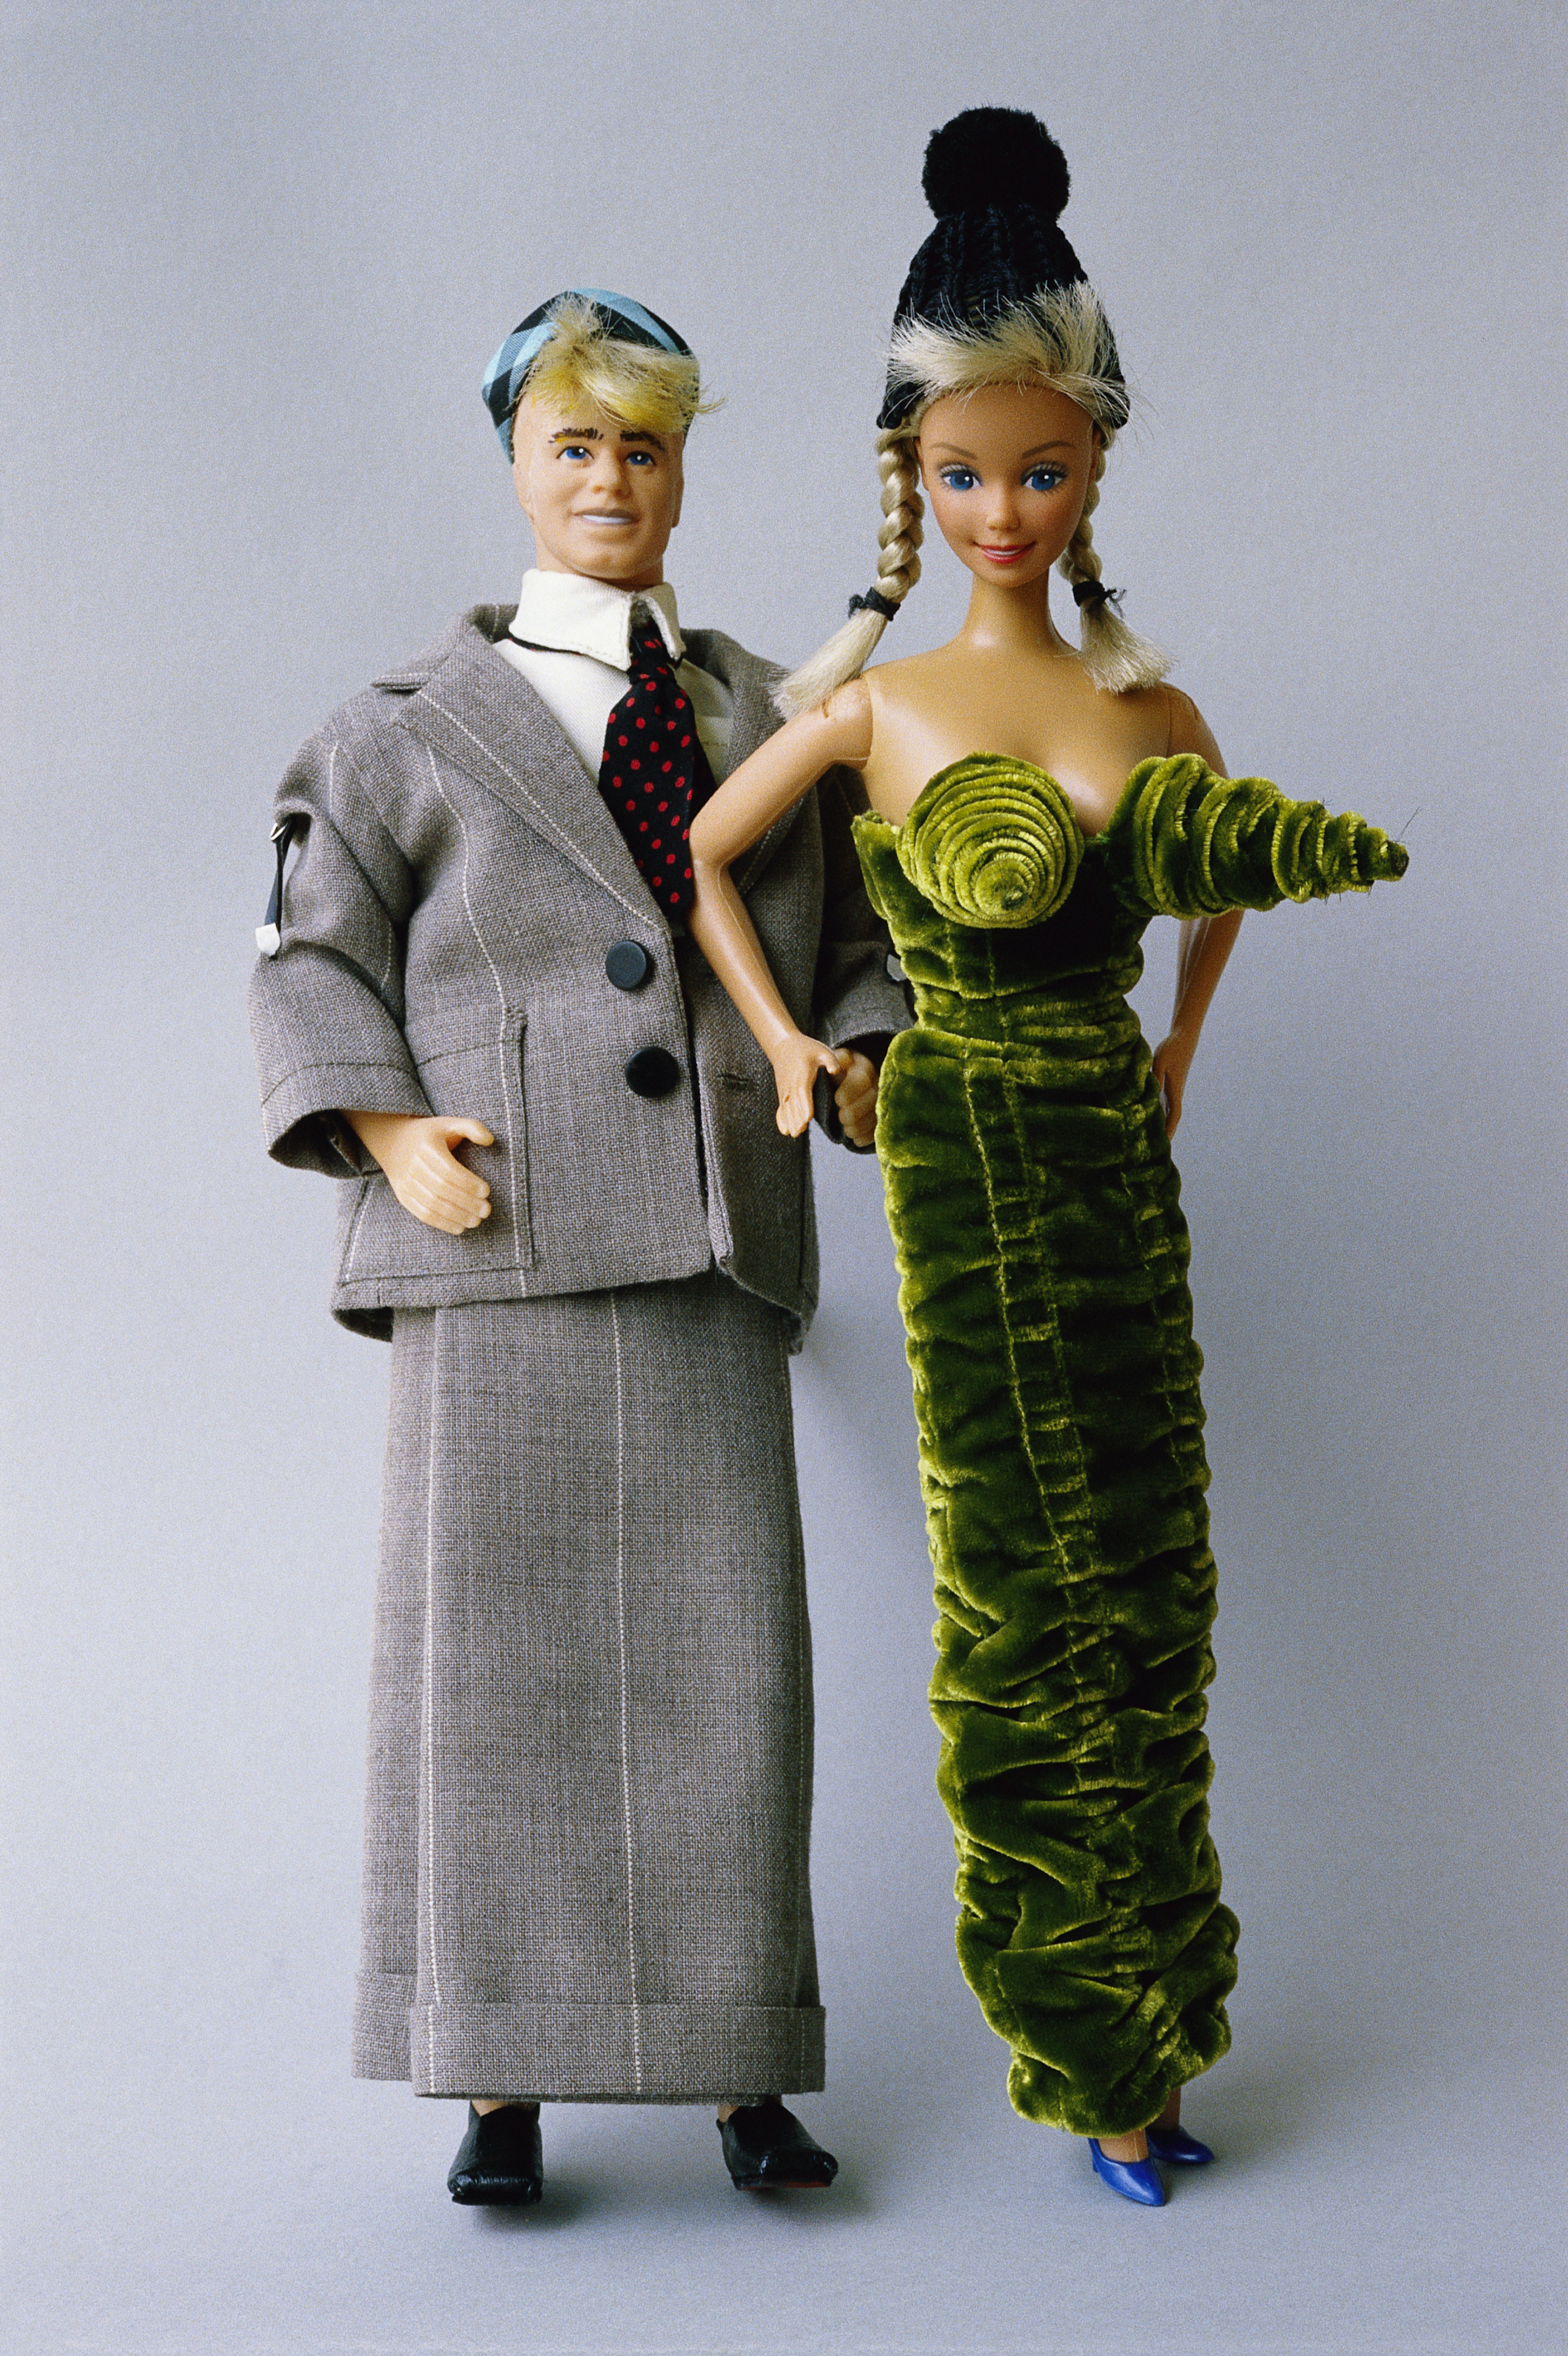 Barbie and Ken dolls from the collection of Barbie aficionado Billy Boy wear outfits designed by Jean-Paul Gaultier